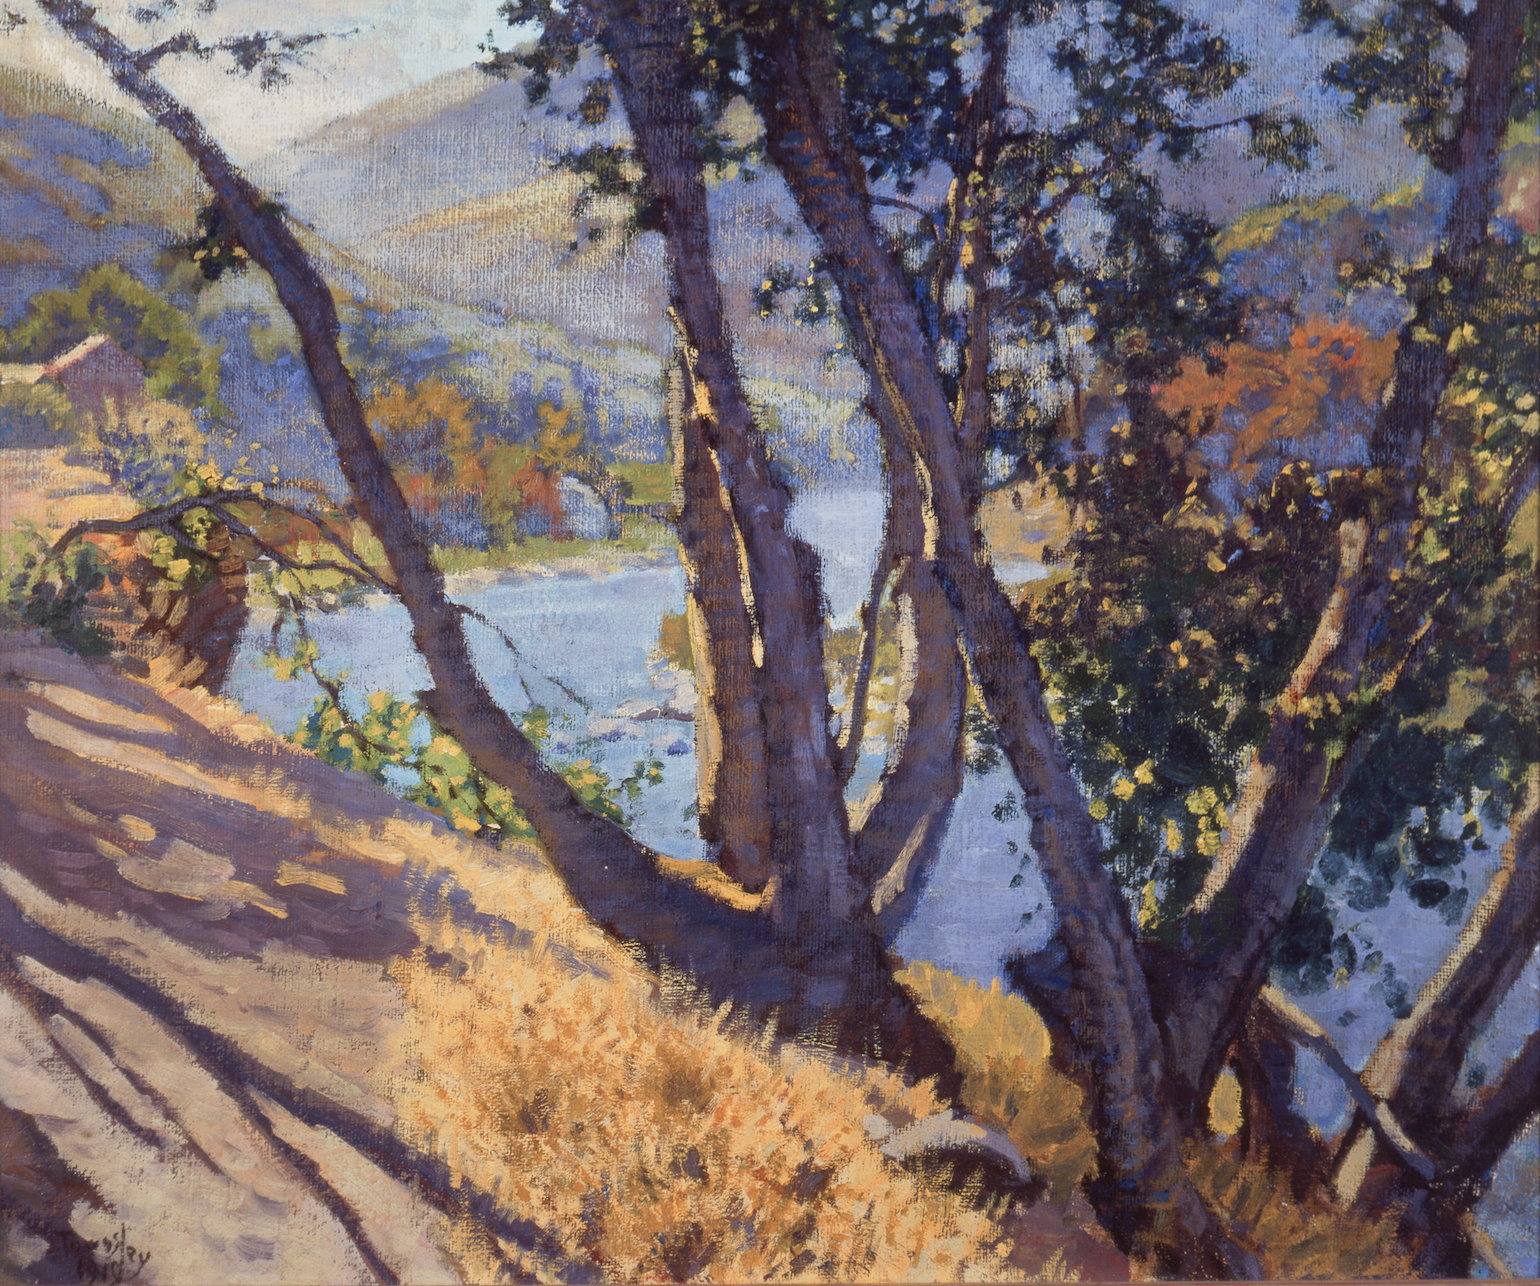 A painting of trees by a creek